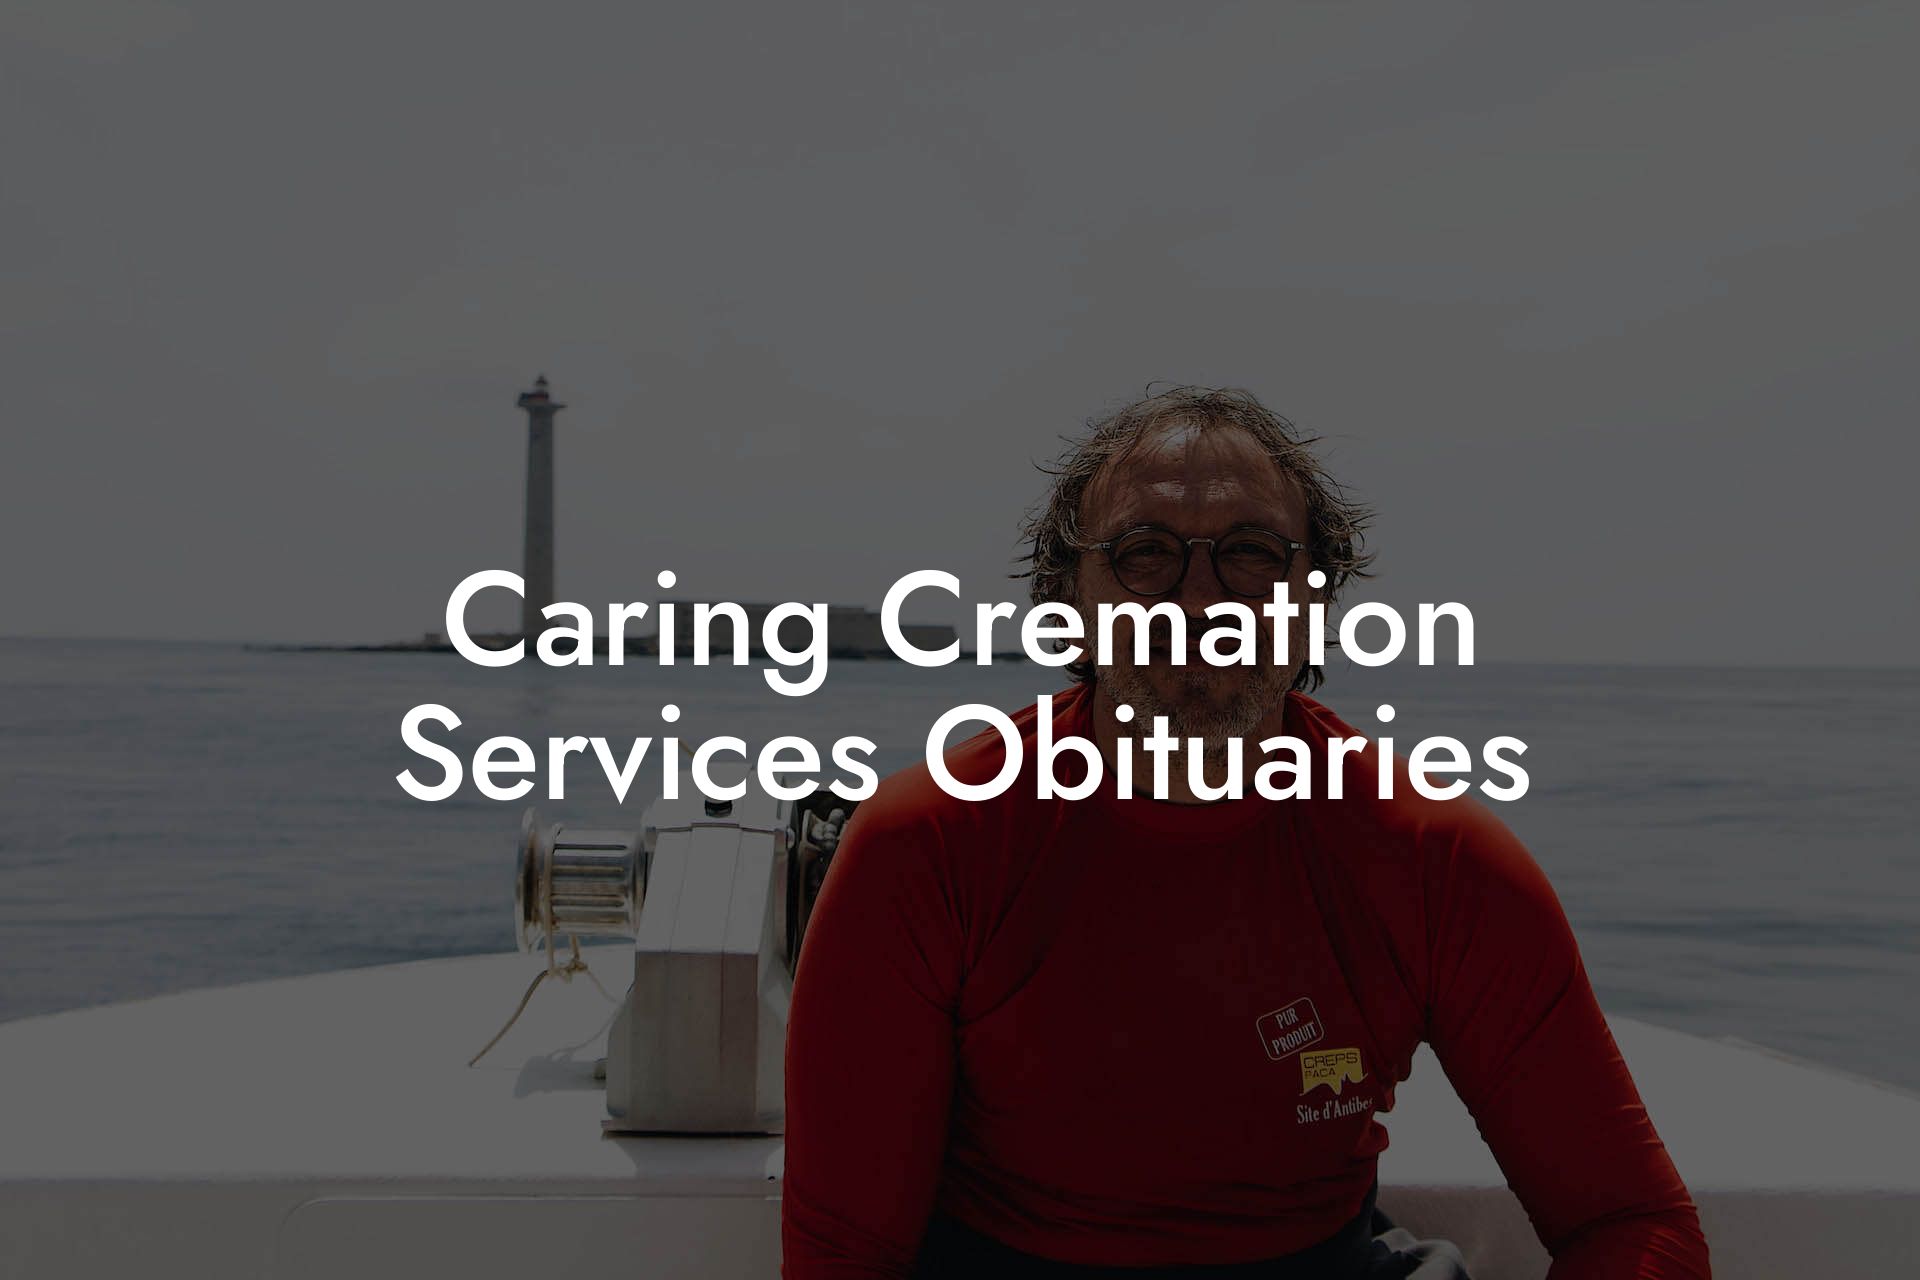 Caring Cremation Services Obituaries